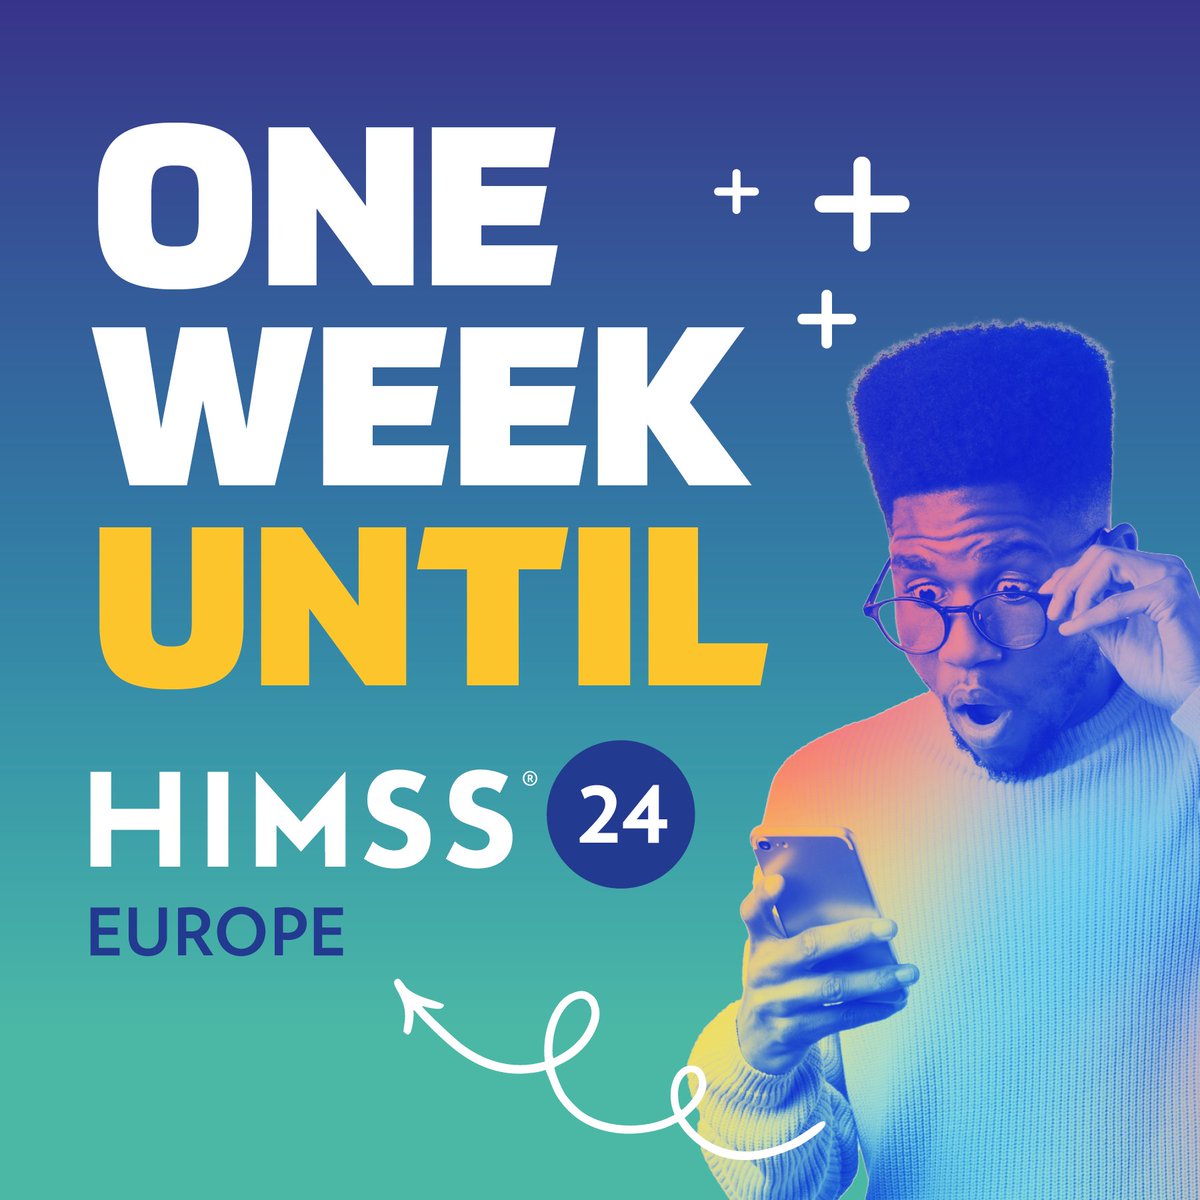 One week left until #HIMSS24Europe! 🚨 We’ve been working for months organising speakers, planning sessions and putting together an amazing experience. 😊 And there are still a few spots available—so if you want to come, the time is now! bit.ly/48AMlpk